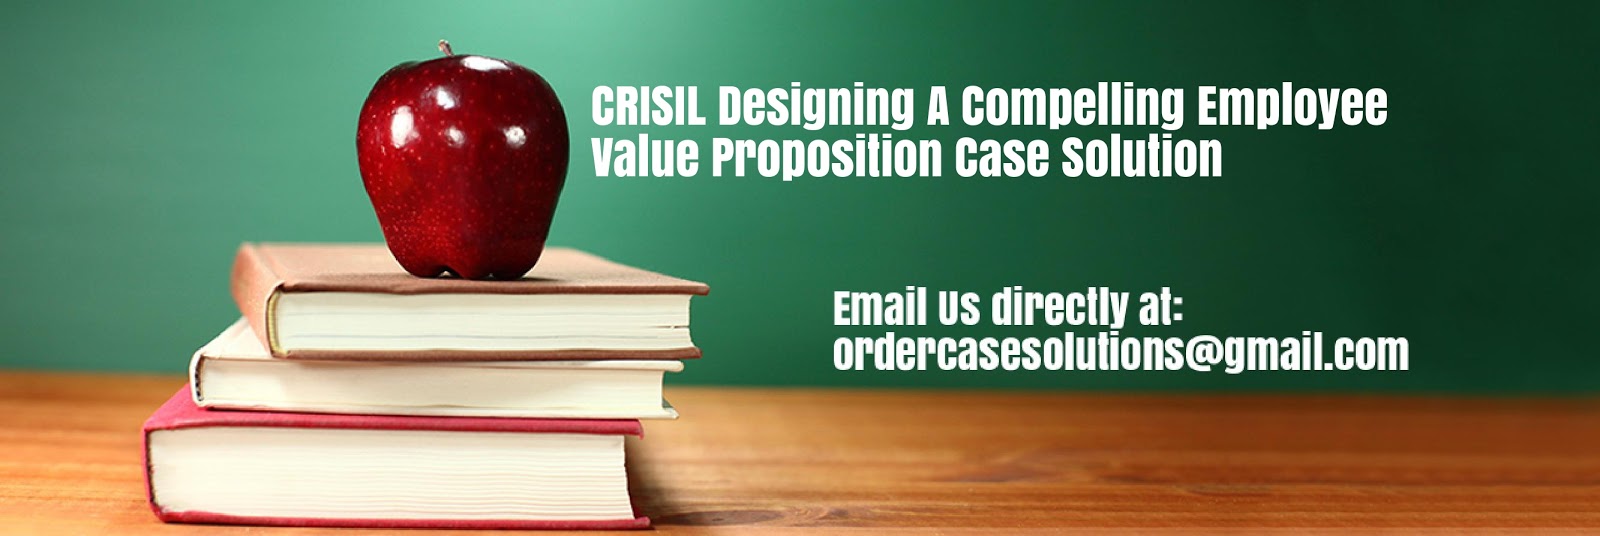 crisil-designing-a-compelling-employee-value-proposition-case-study-analysis-solution-case